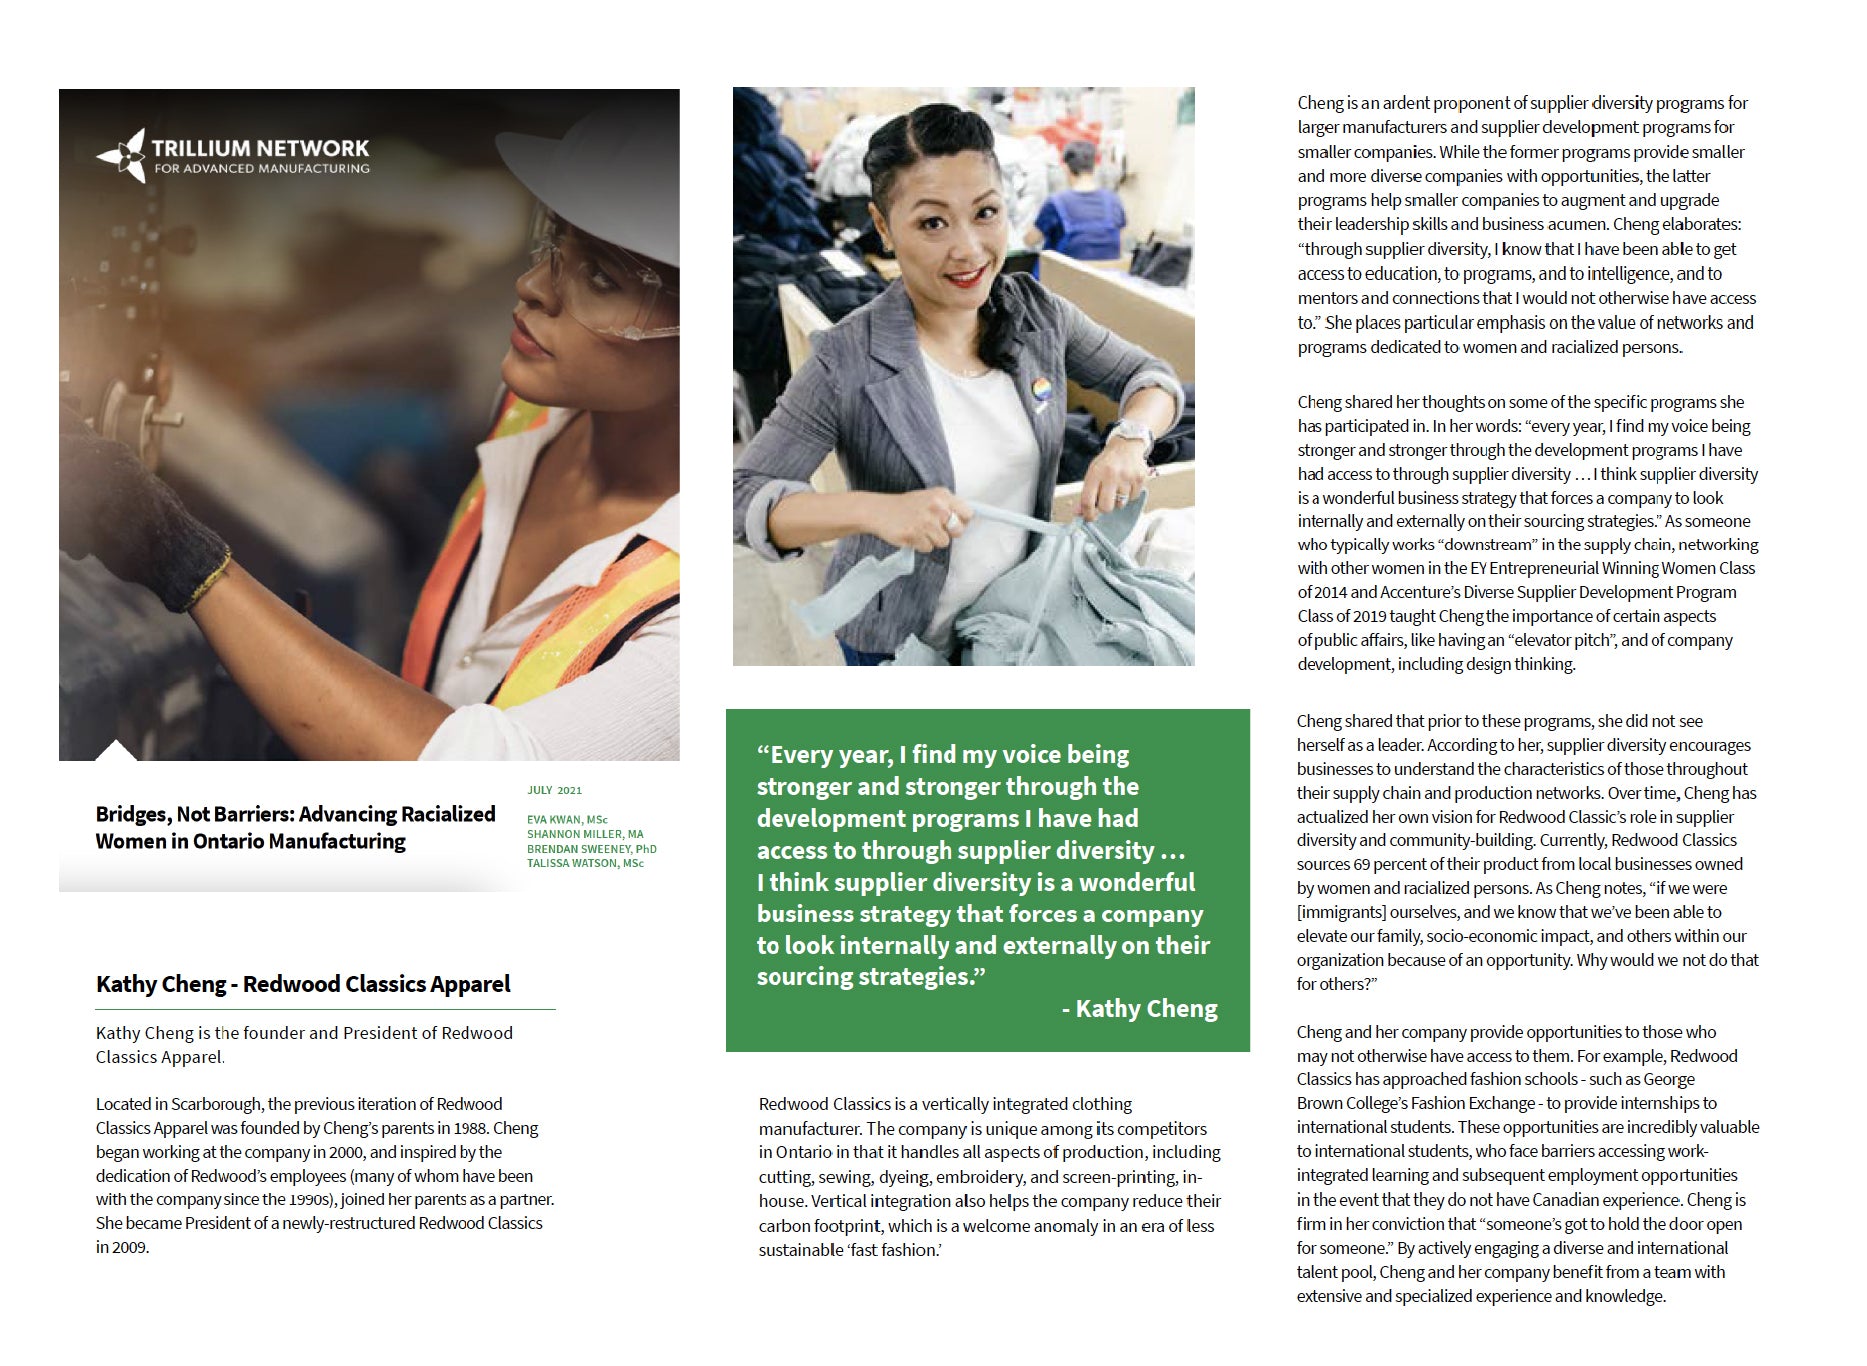 Trillium Network: Bridges, Not Barriers: Advancing Racialized Women in Ontario Manufacturing